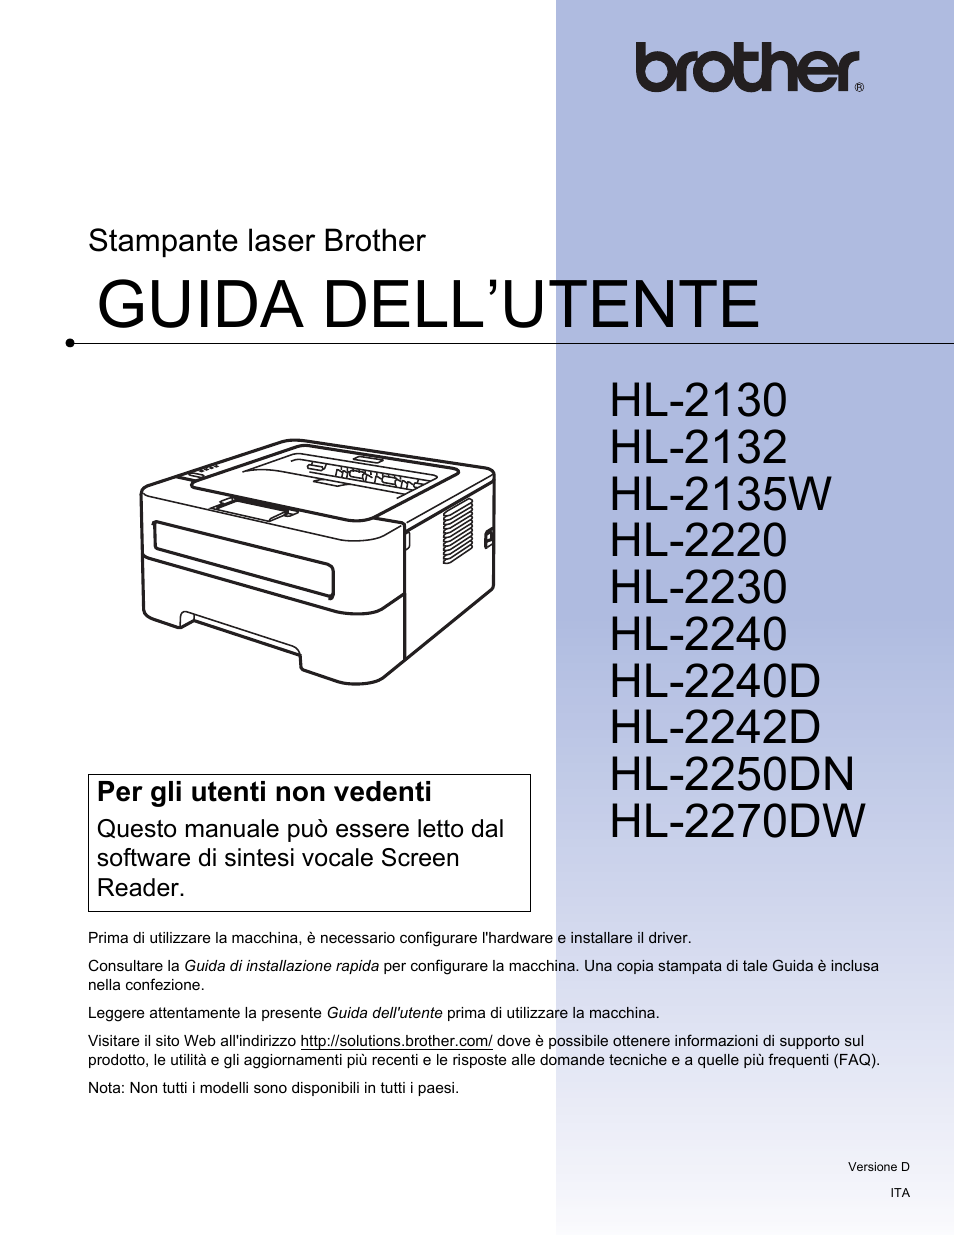 Brother HL 2270DW Manuale d'uso | Pagine: 151